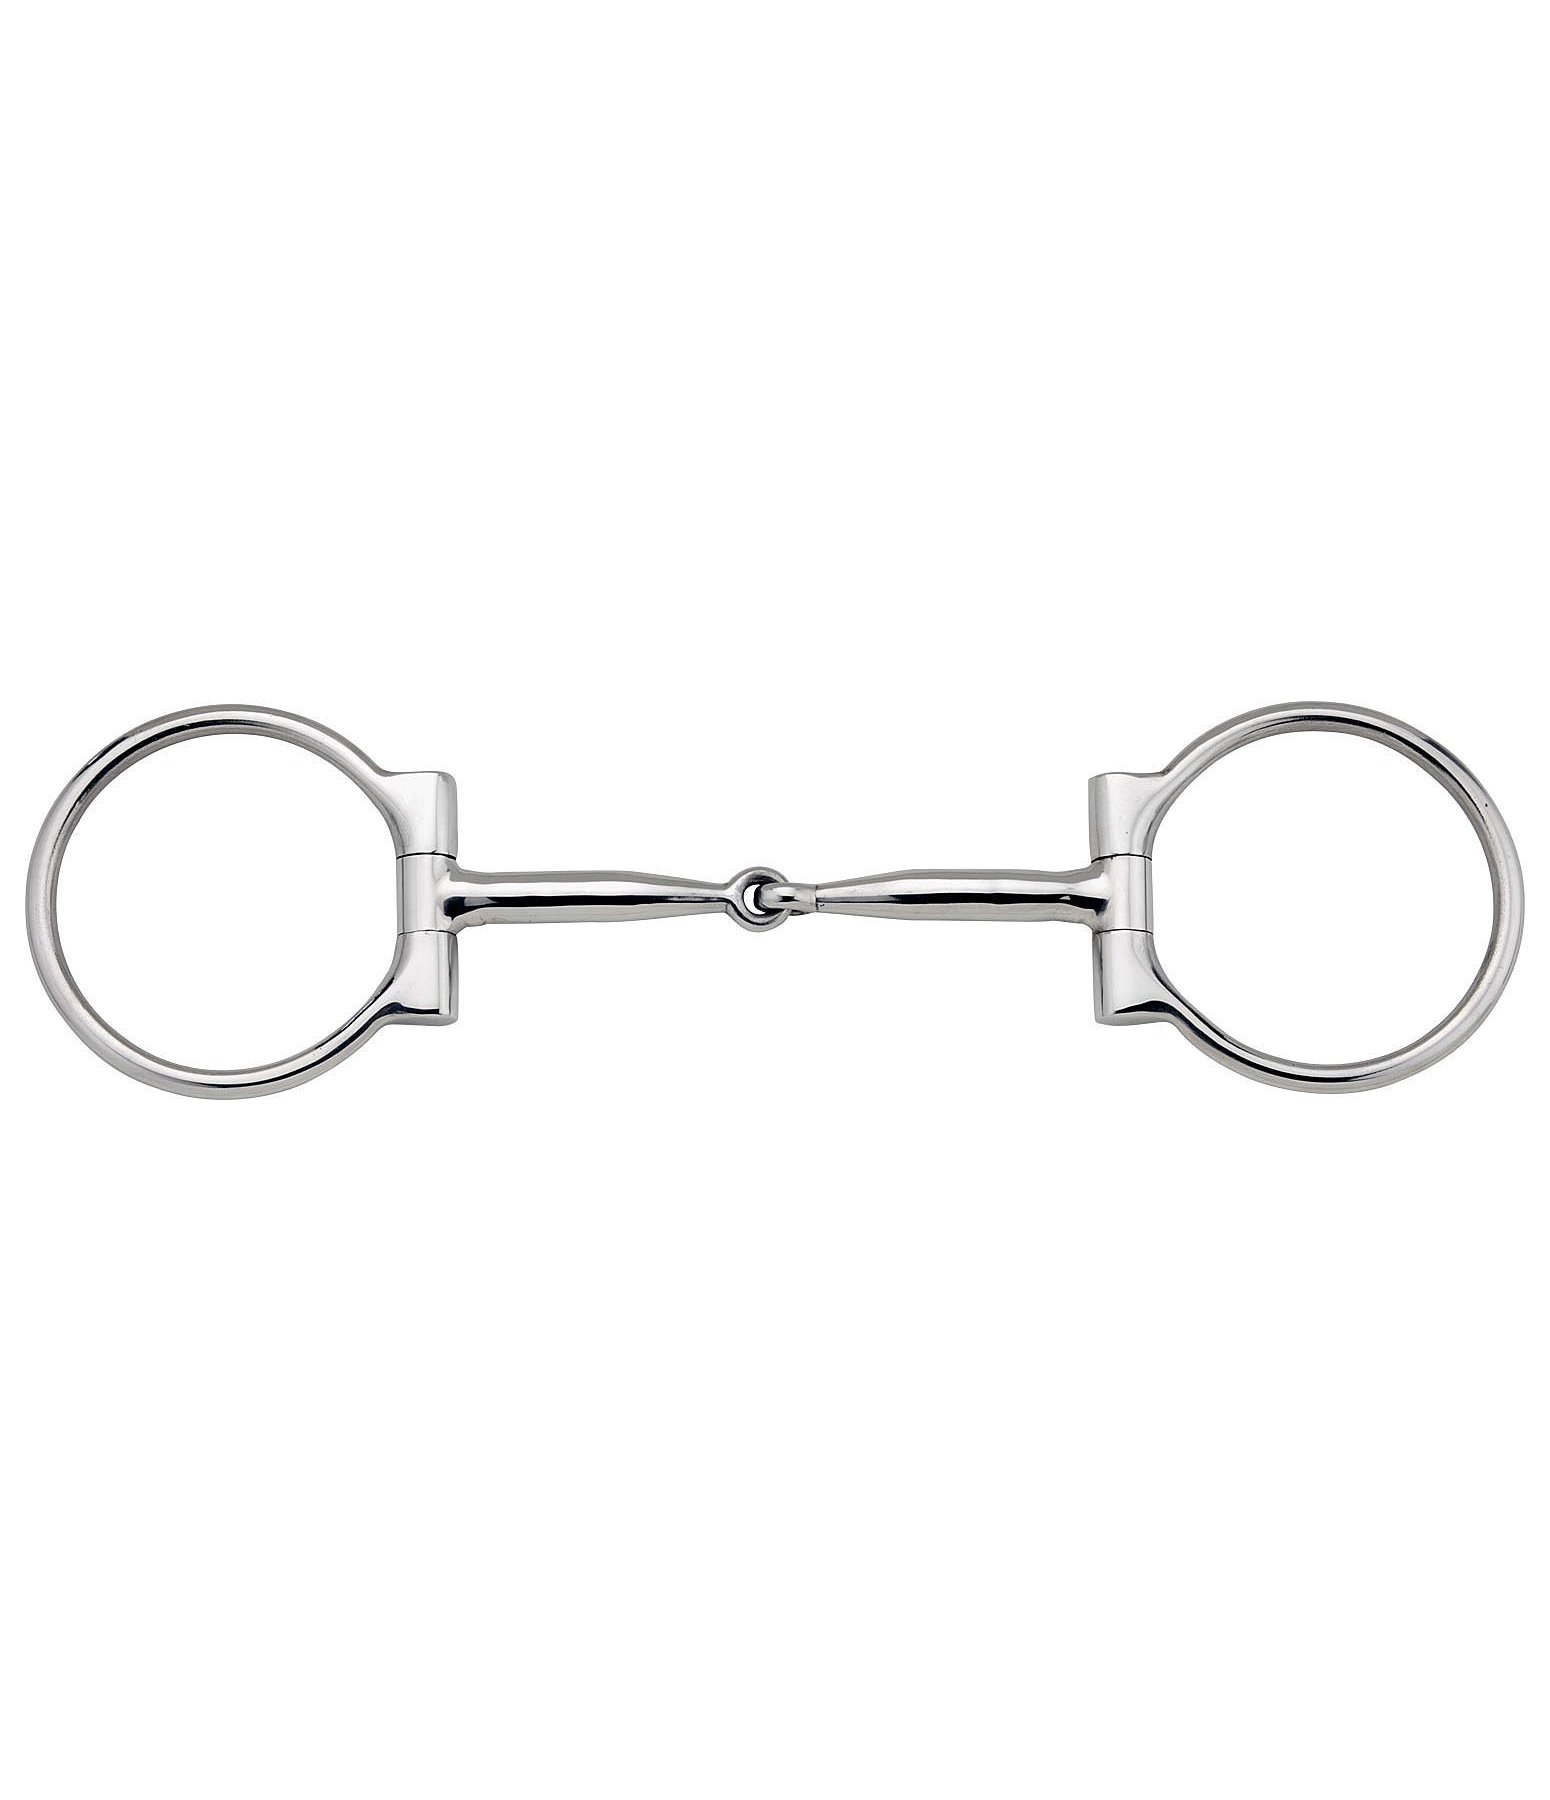 Stainless Steel Offset Dee Snaffle